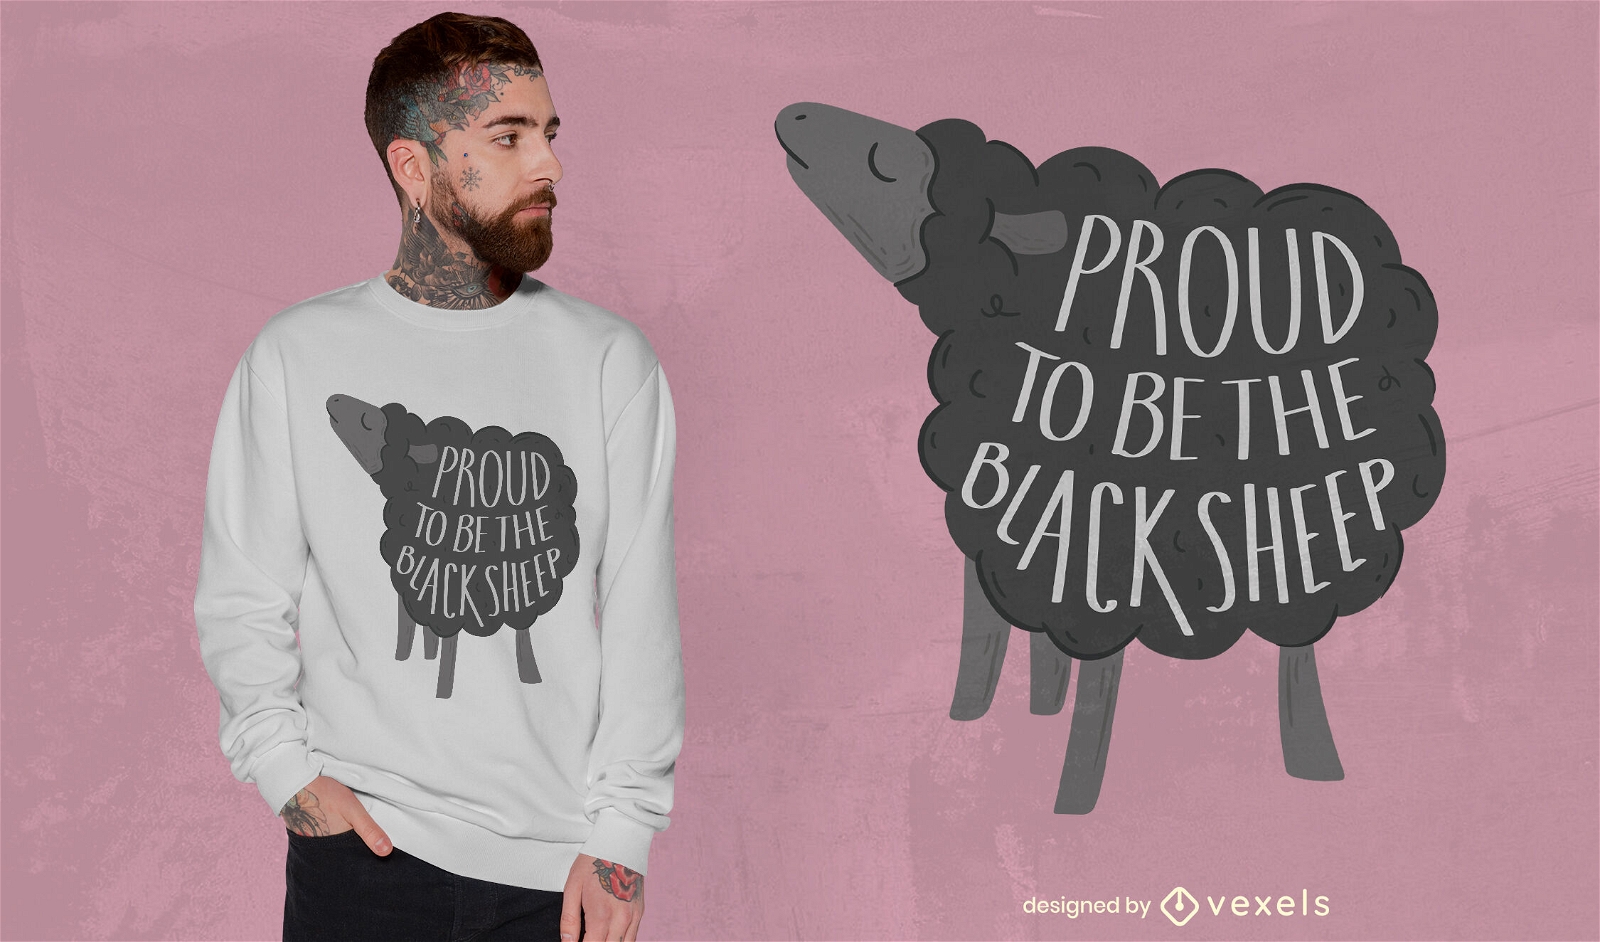 Awesome black sheep quote t-shirt design